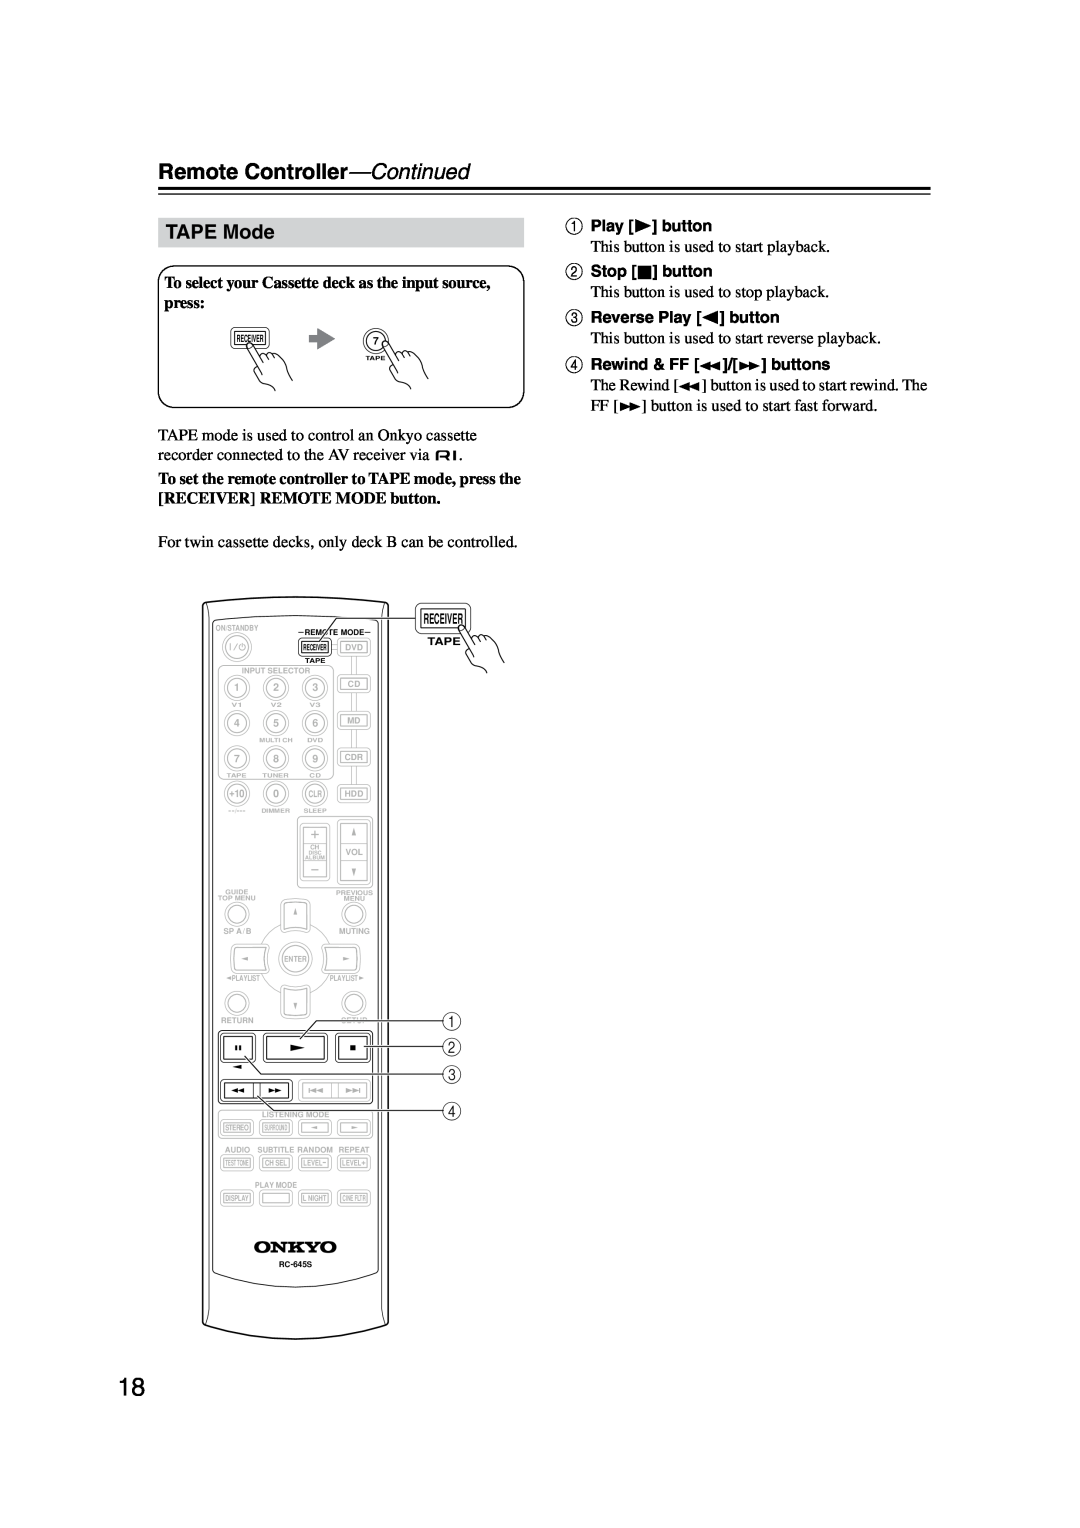 Onkyo HT-S4100 instruction manual Remote Controller-Continued, TAPE Mode 